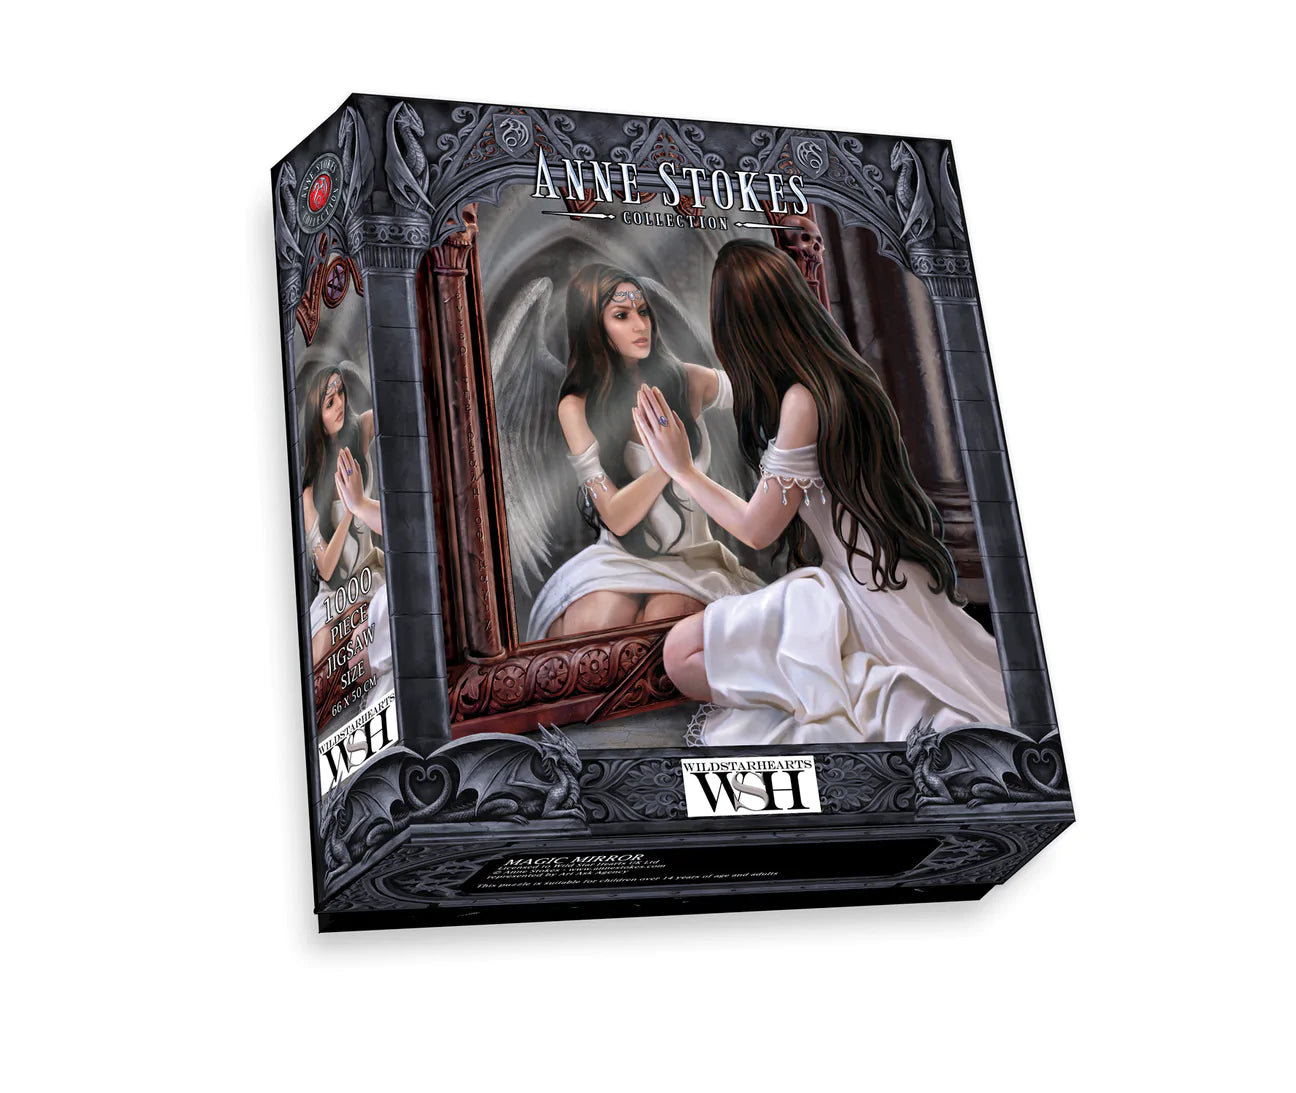 Magic Mirror by Anne Stokes, 1000 Piece Limited Edition Puzzle